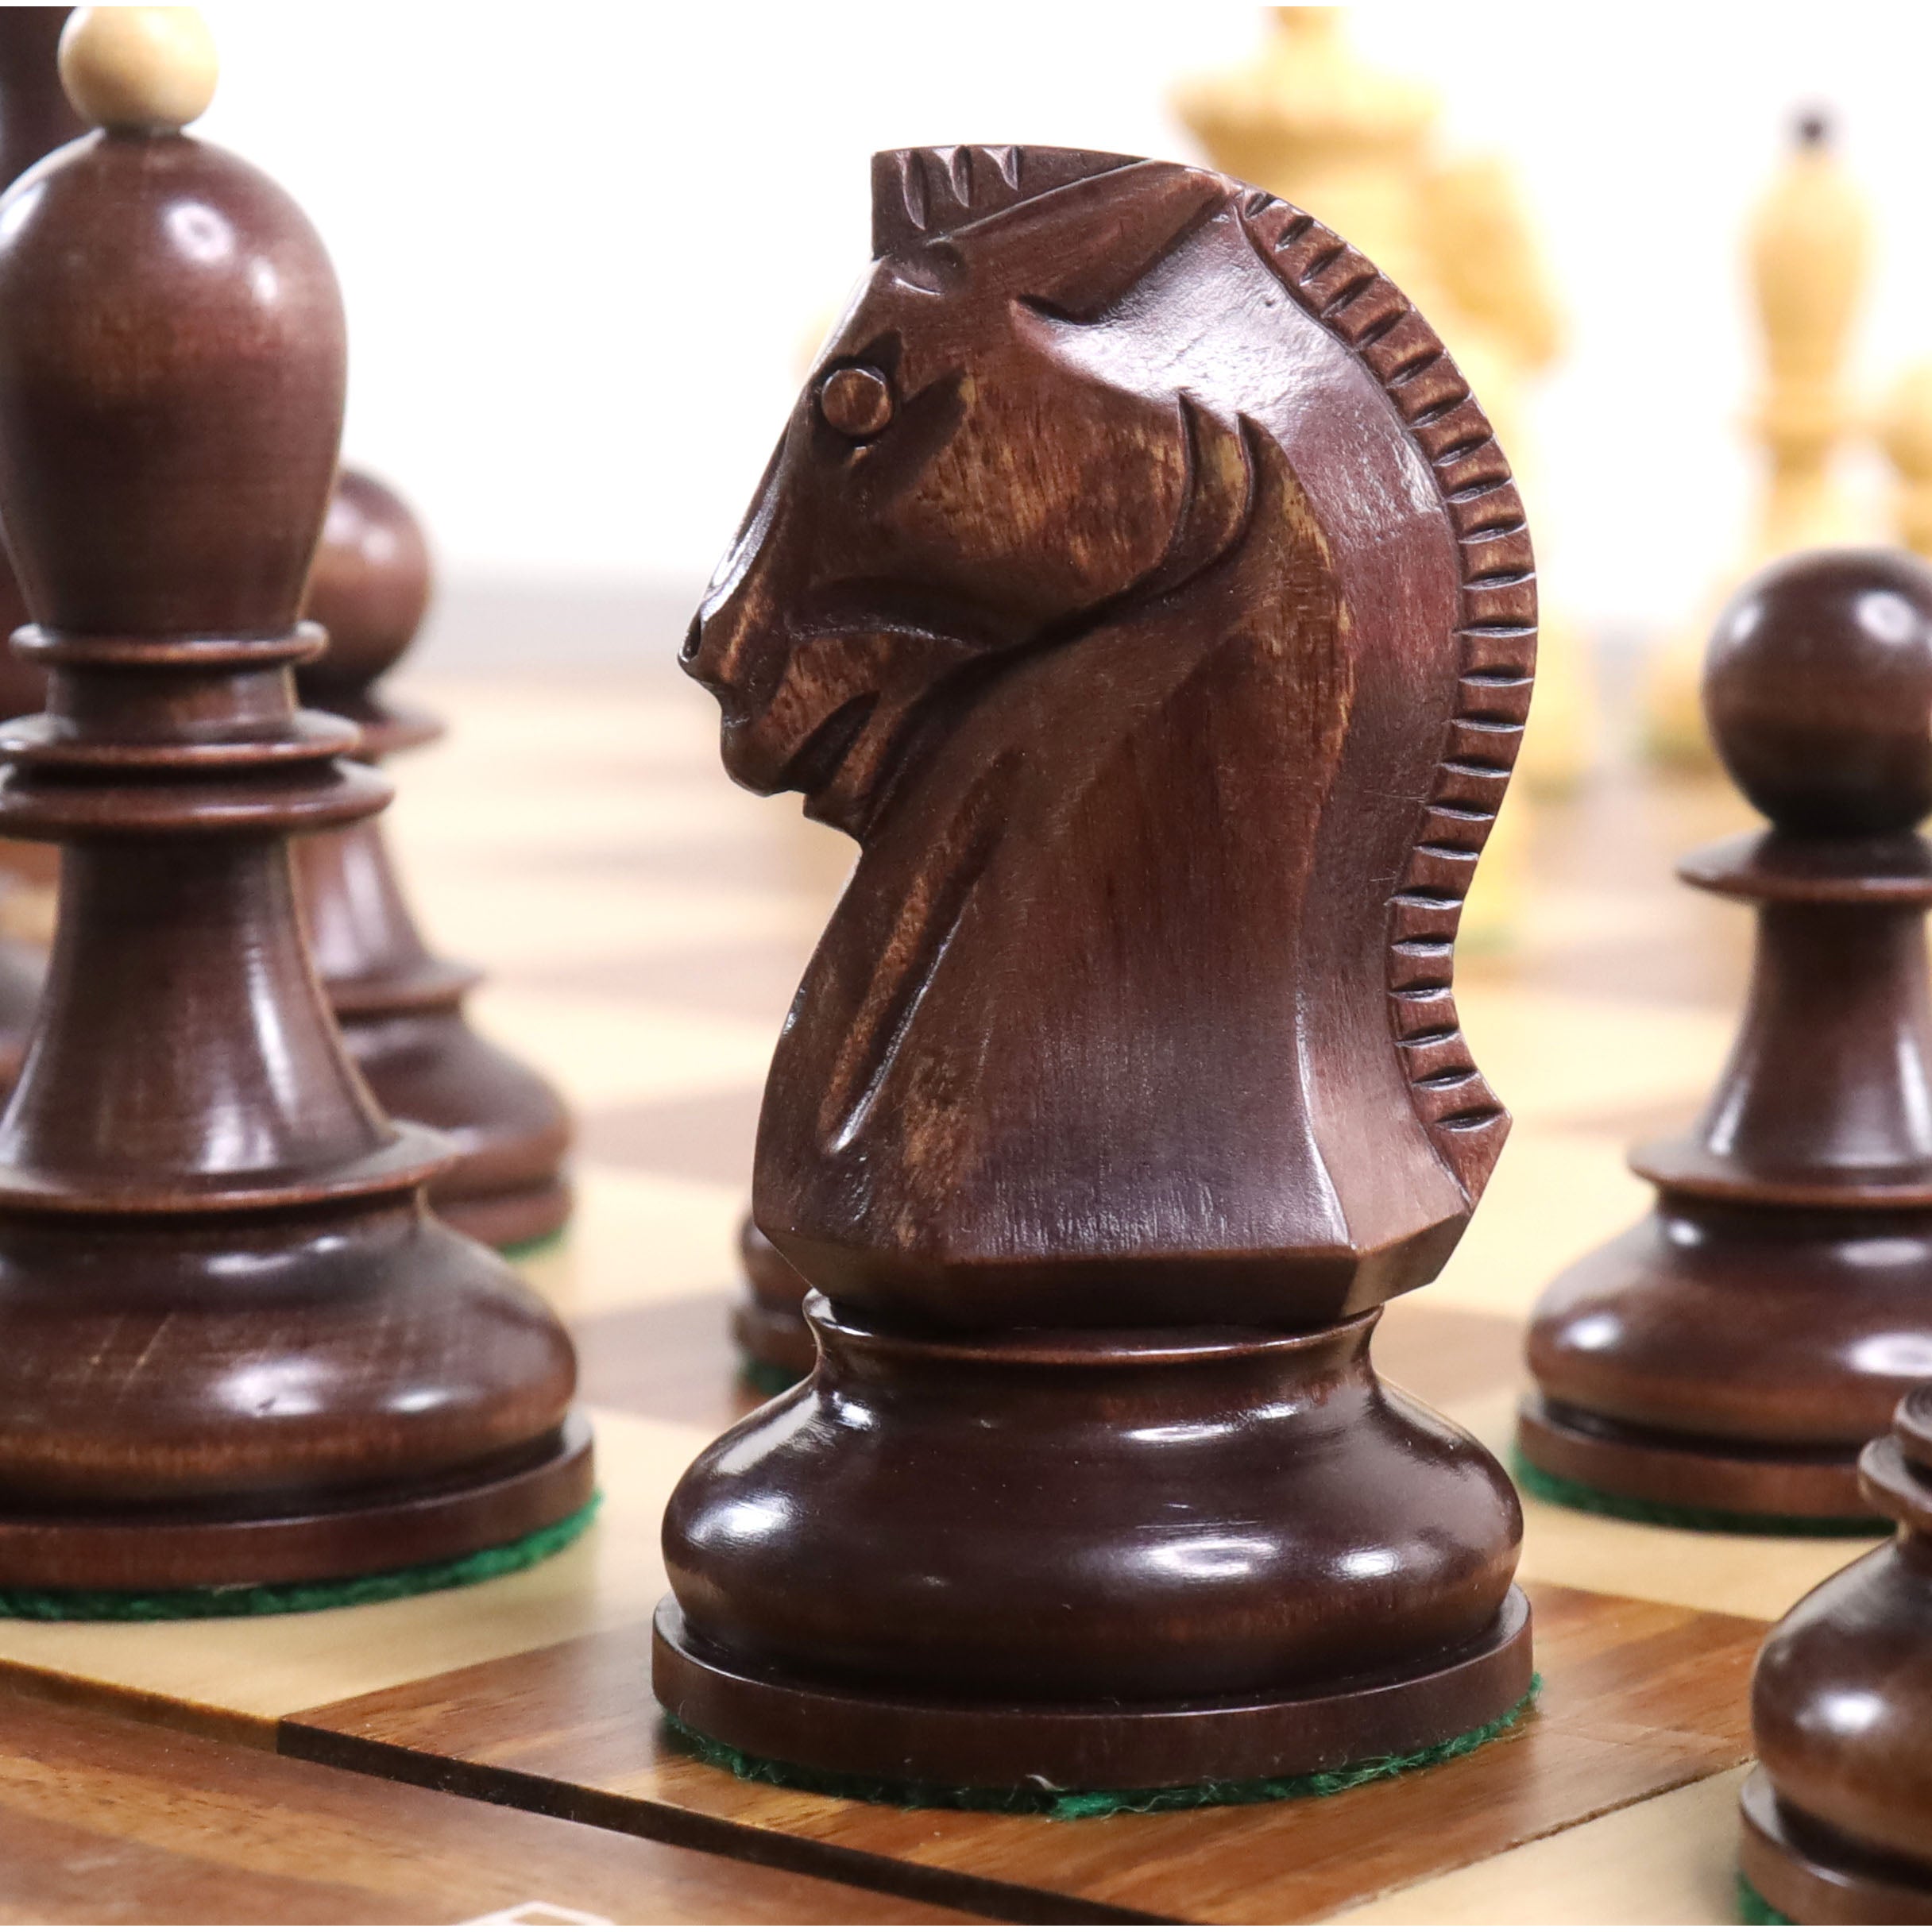 1950s' Fischer Dubrovnik Chess Pieces Only Set - Mahogany Stained & Bo
– royalchessmall